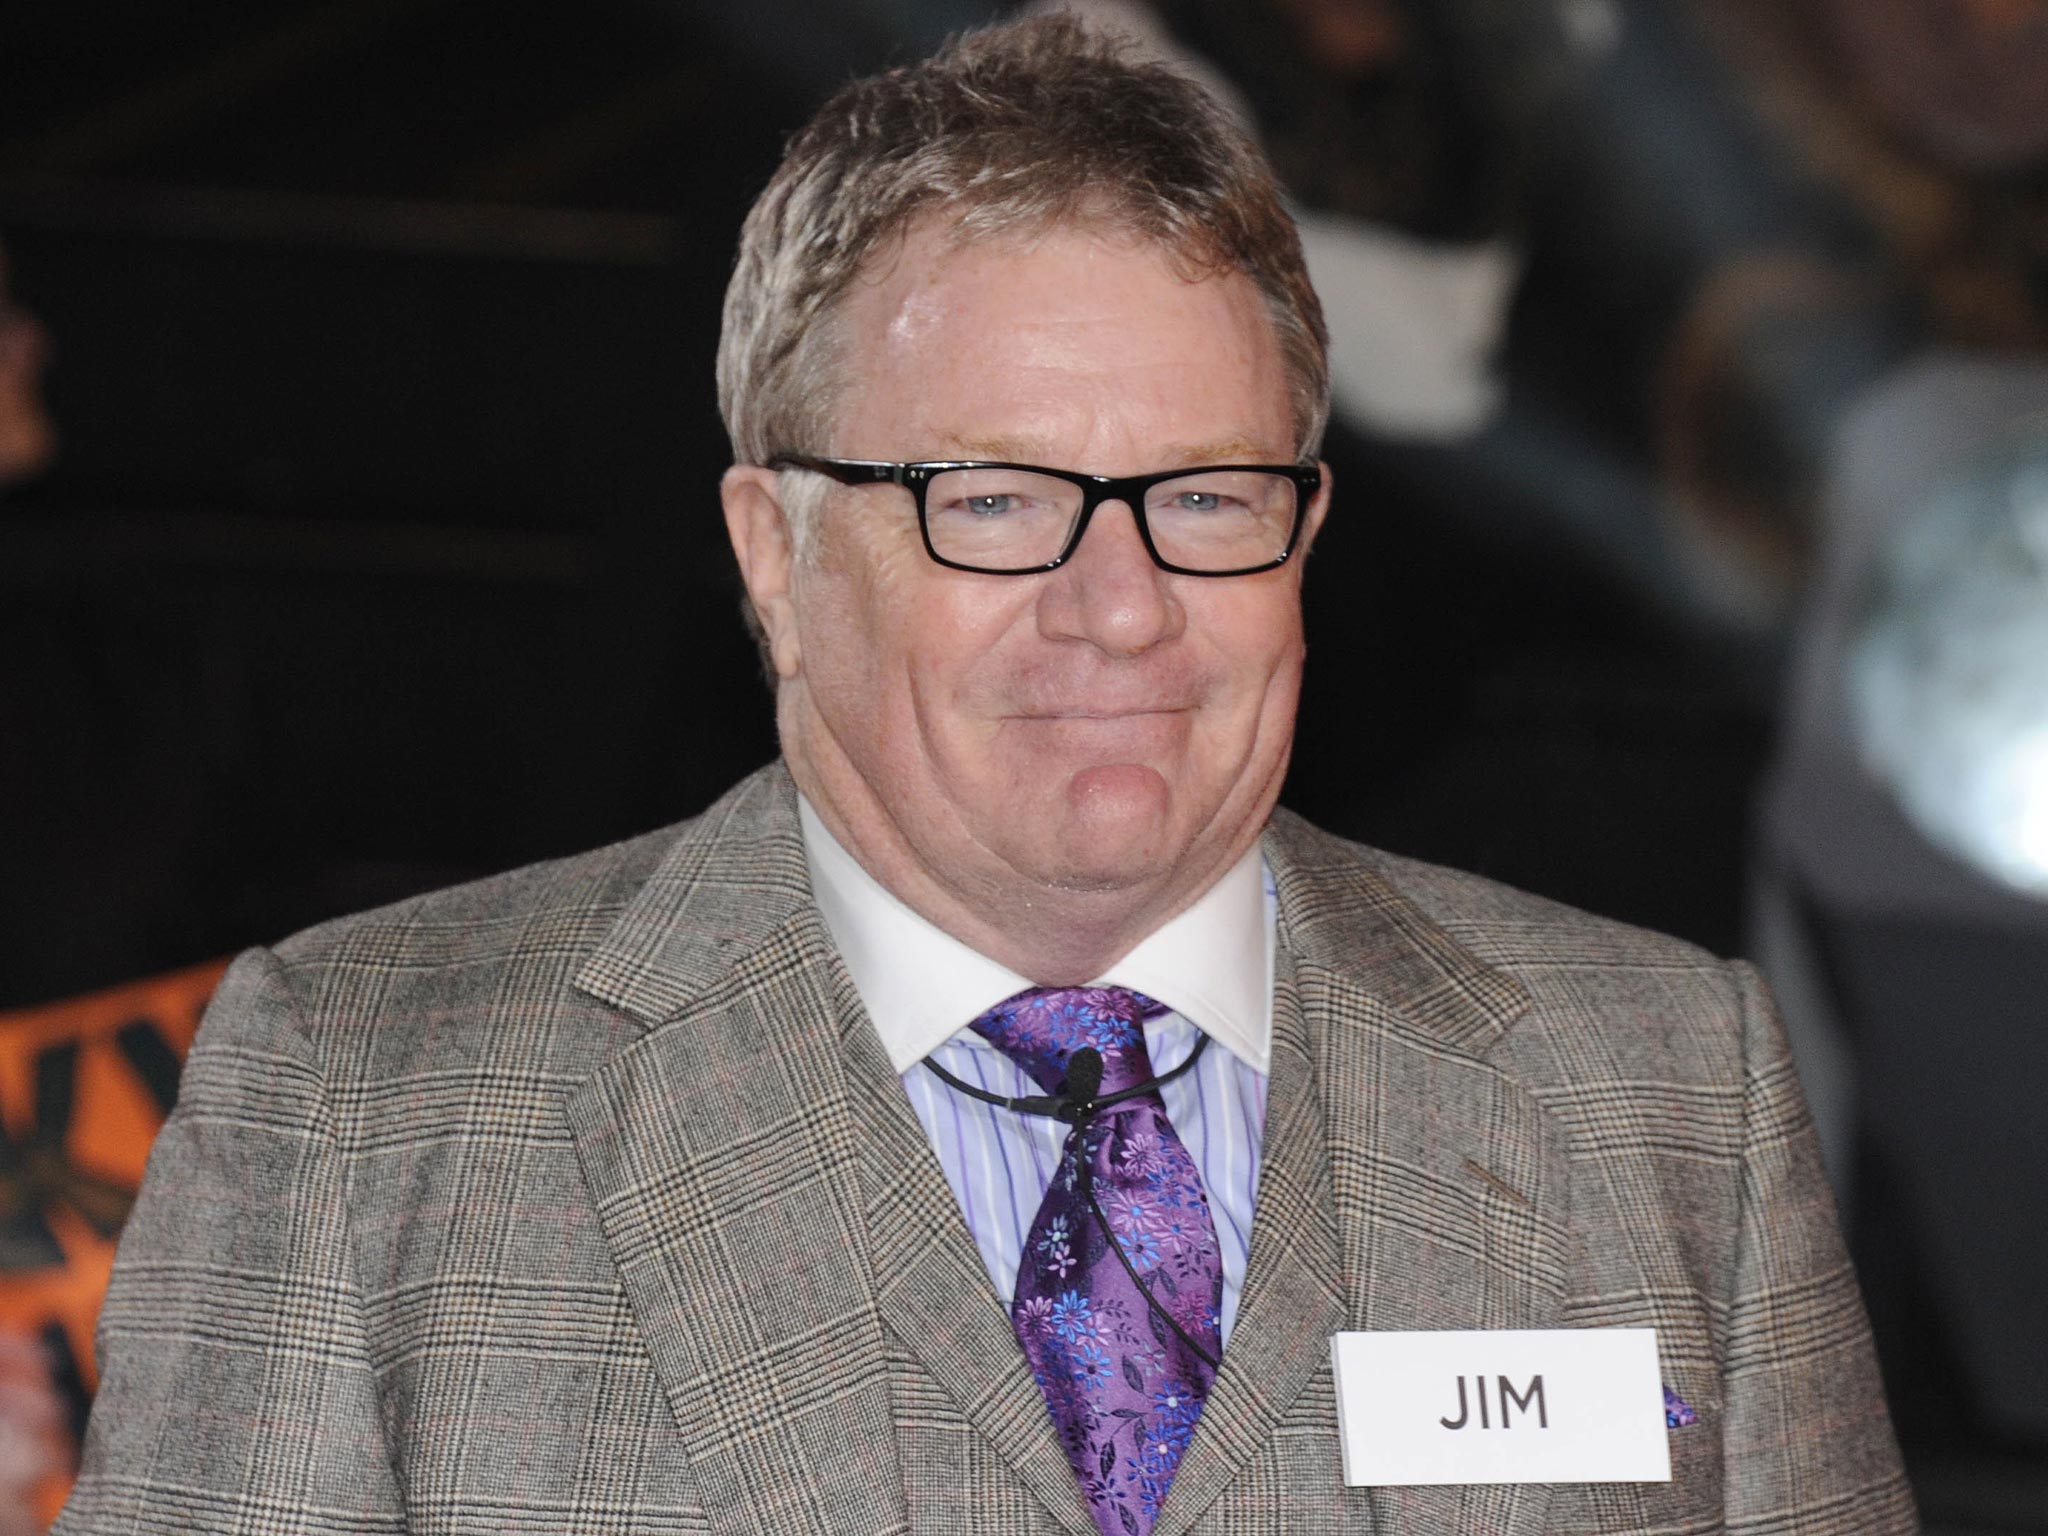 Television presenter Jim Davidson has been cleared of historical sex allegations